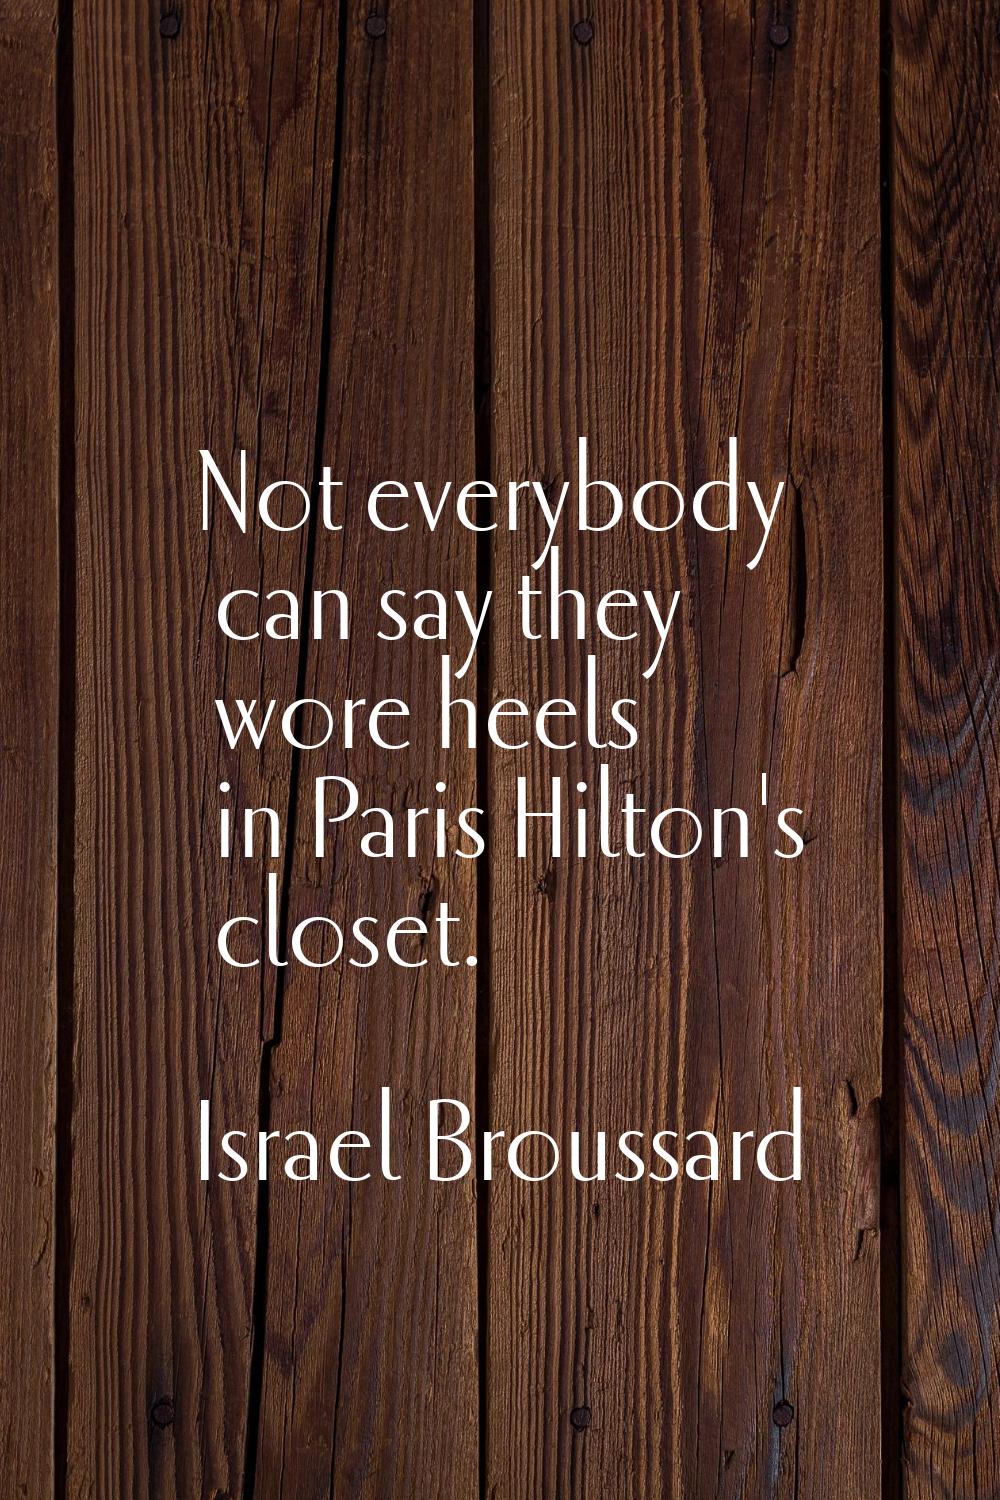 Not everybody can say they wore heels in Paris Hilton's closet.